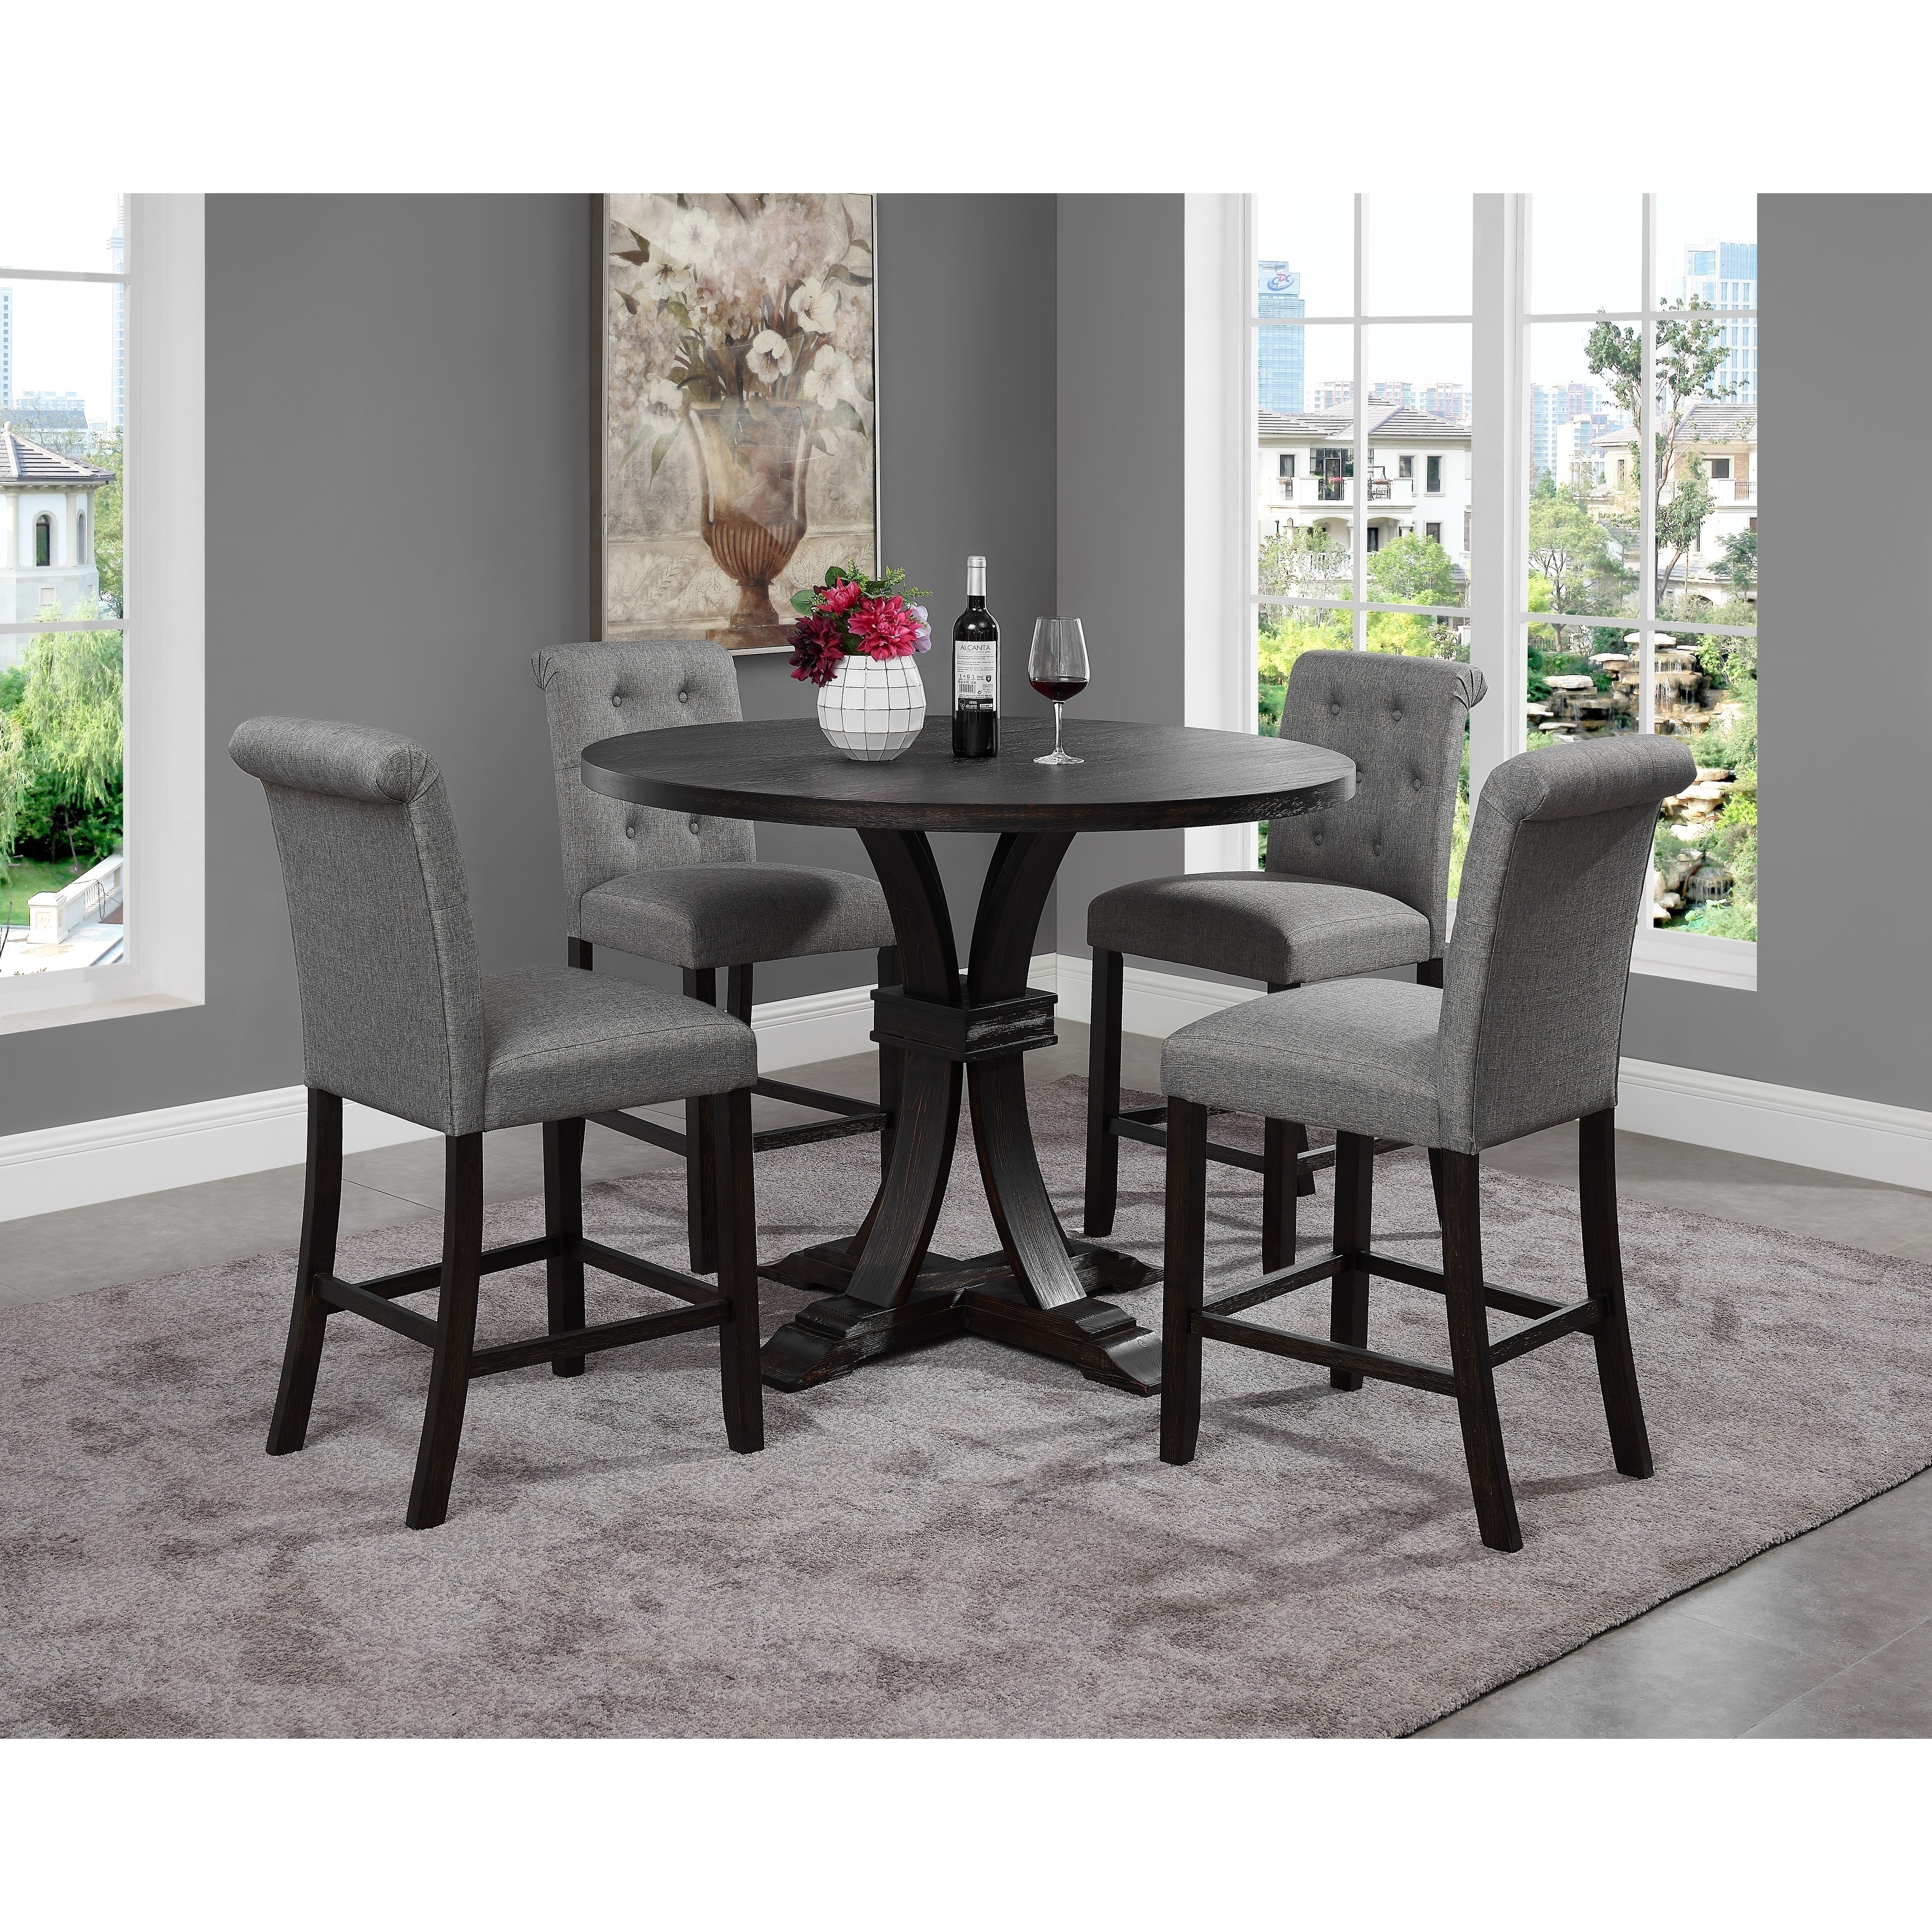 Siena Distressed Black Finish 5 Piece Counter Height Dining set 